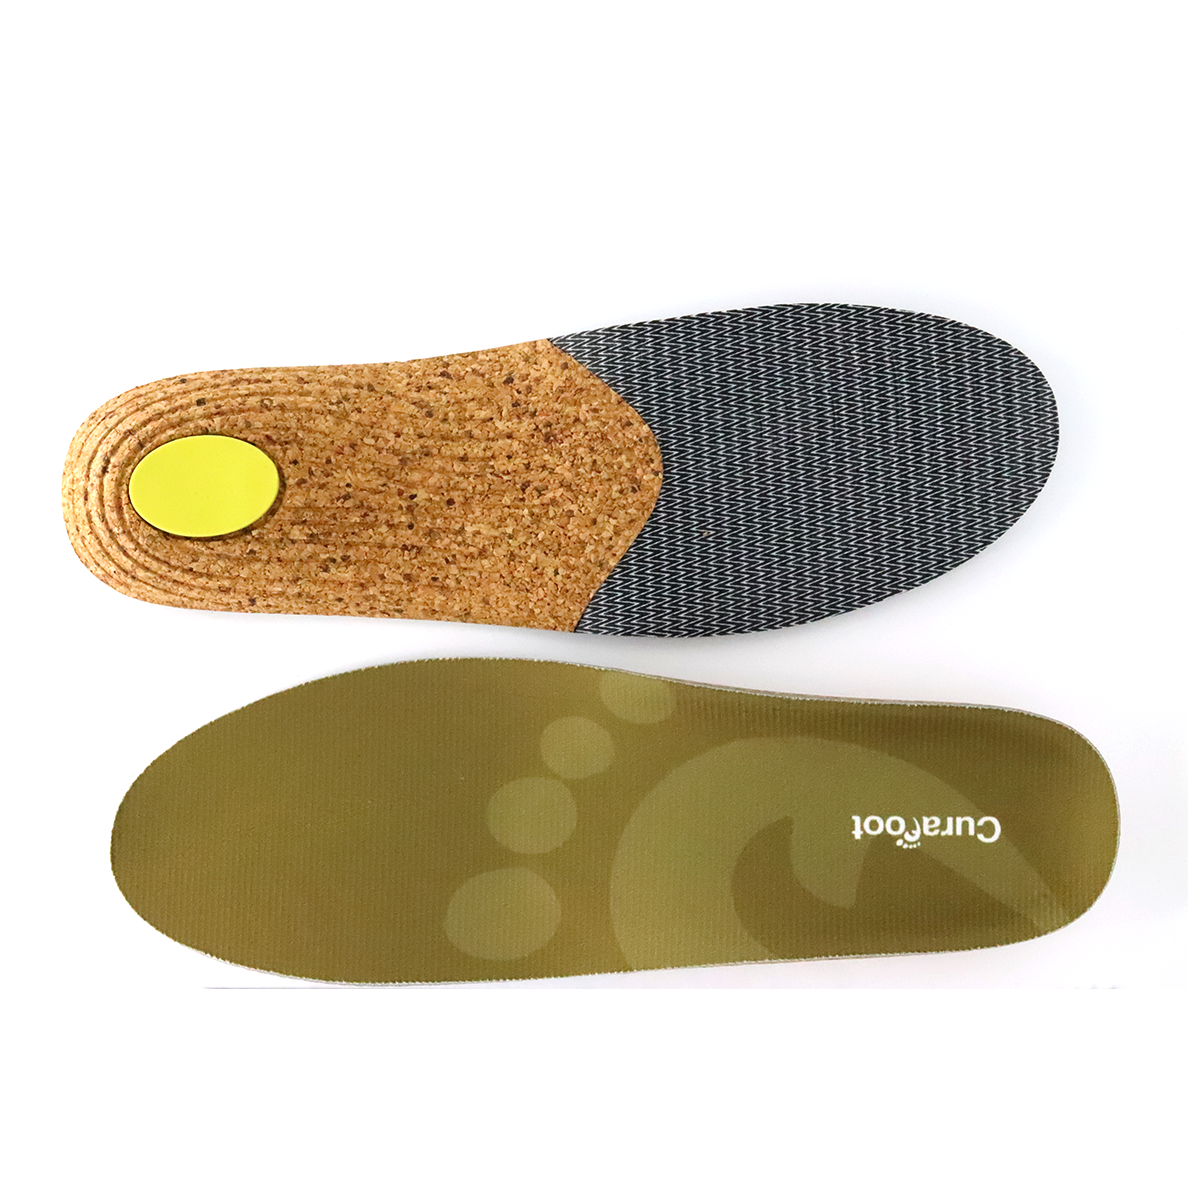 Curafoot Running Shoe Insoles